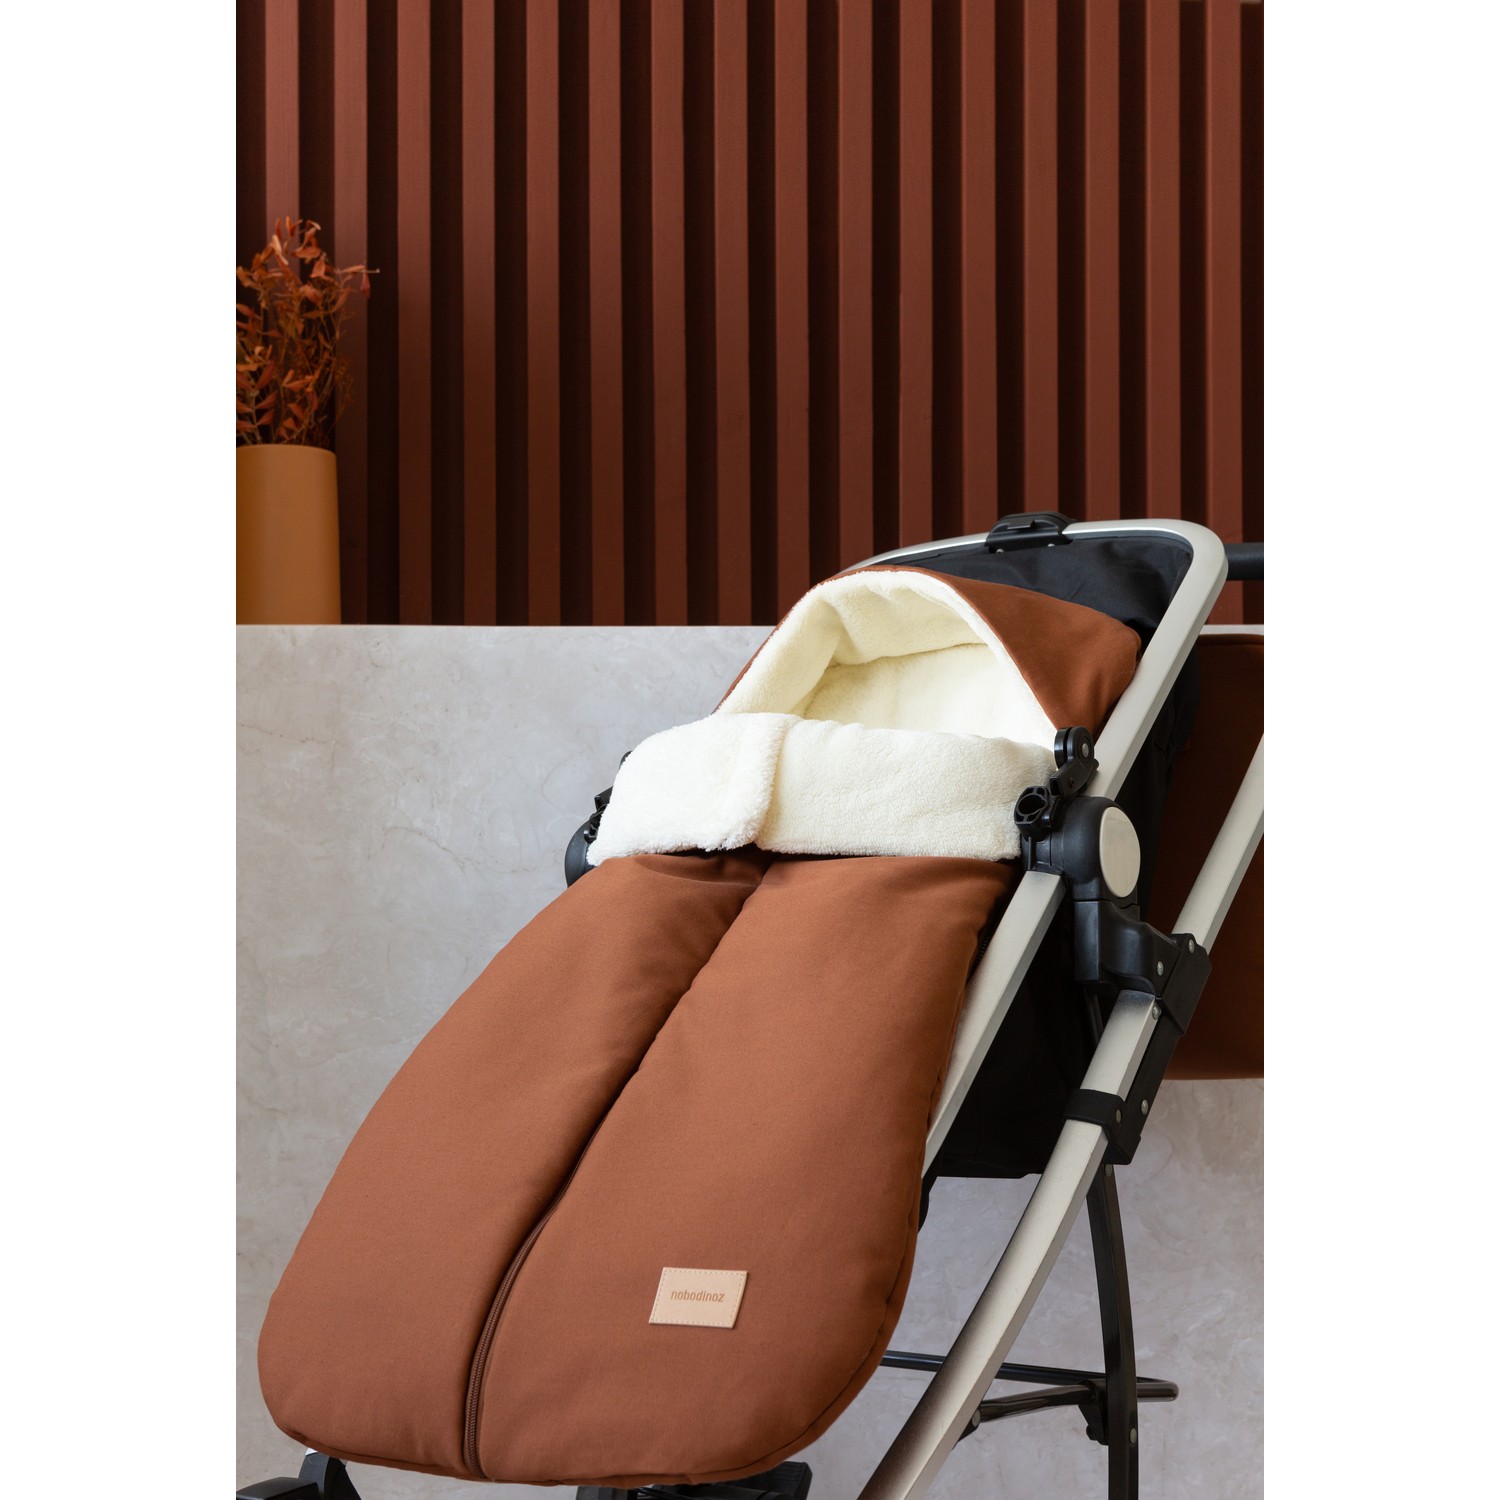 chanceliere-baby-on-the-go-clay-brown-nobodinoz.nd2lf7.max